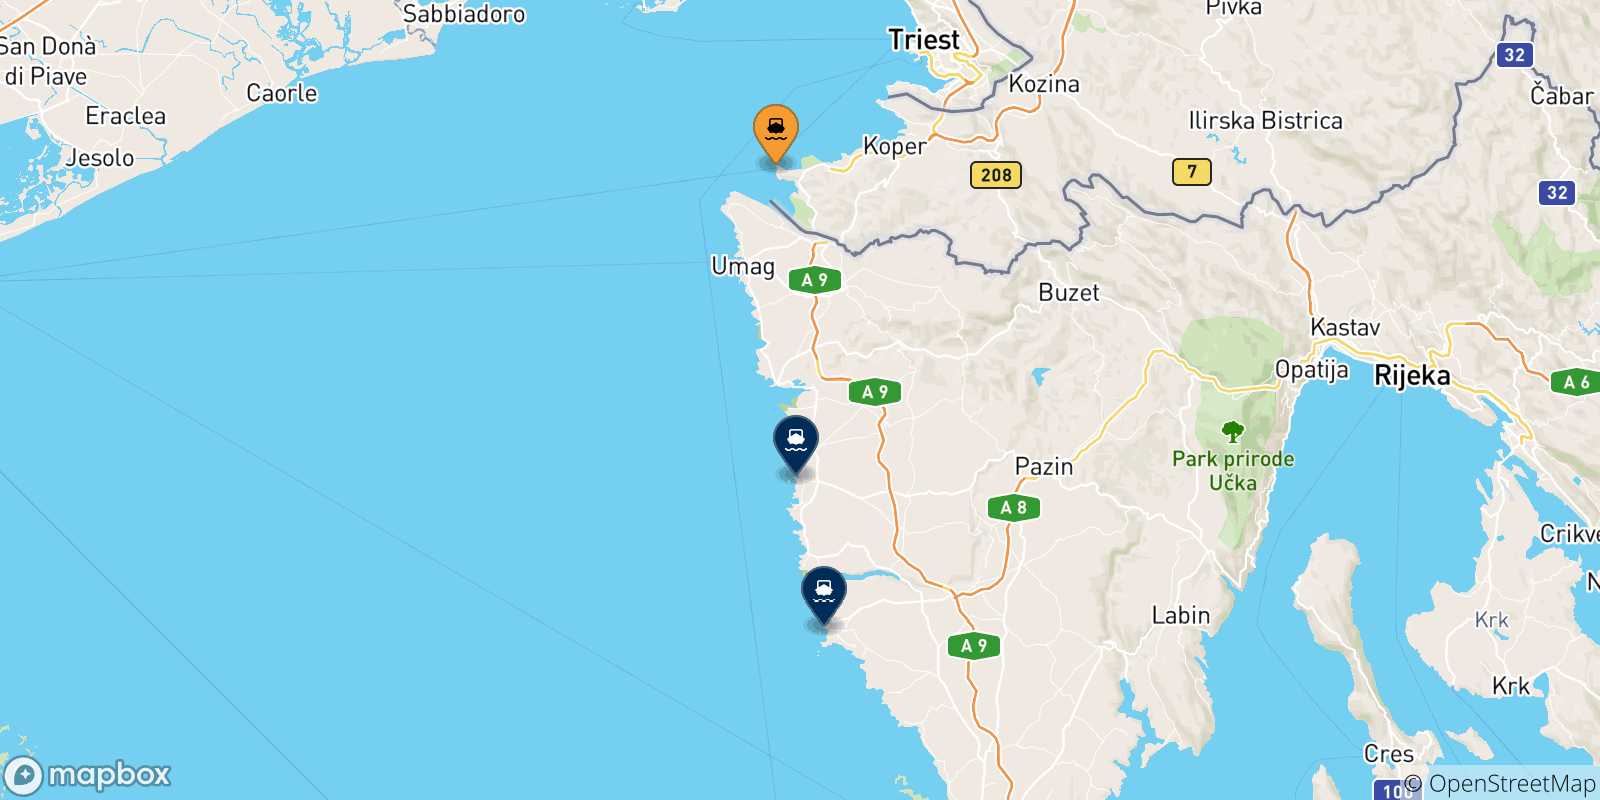 Map of the possible routes between Piran and Croatia